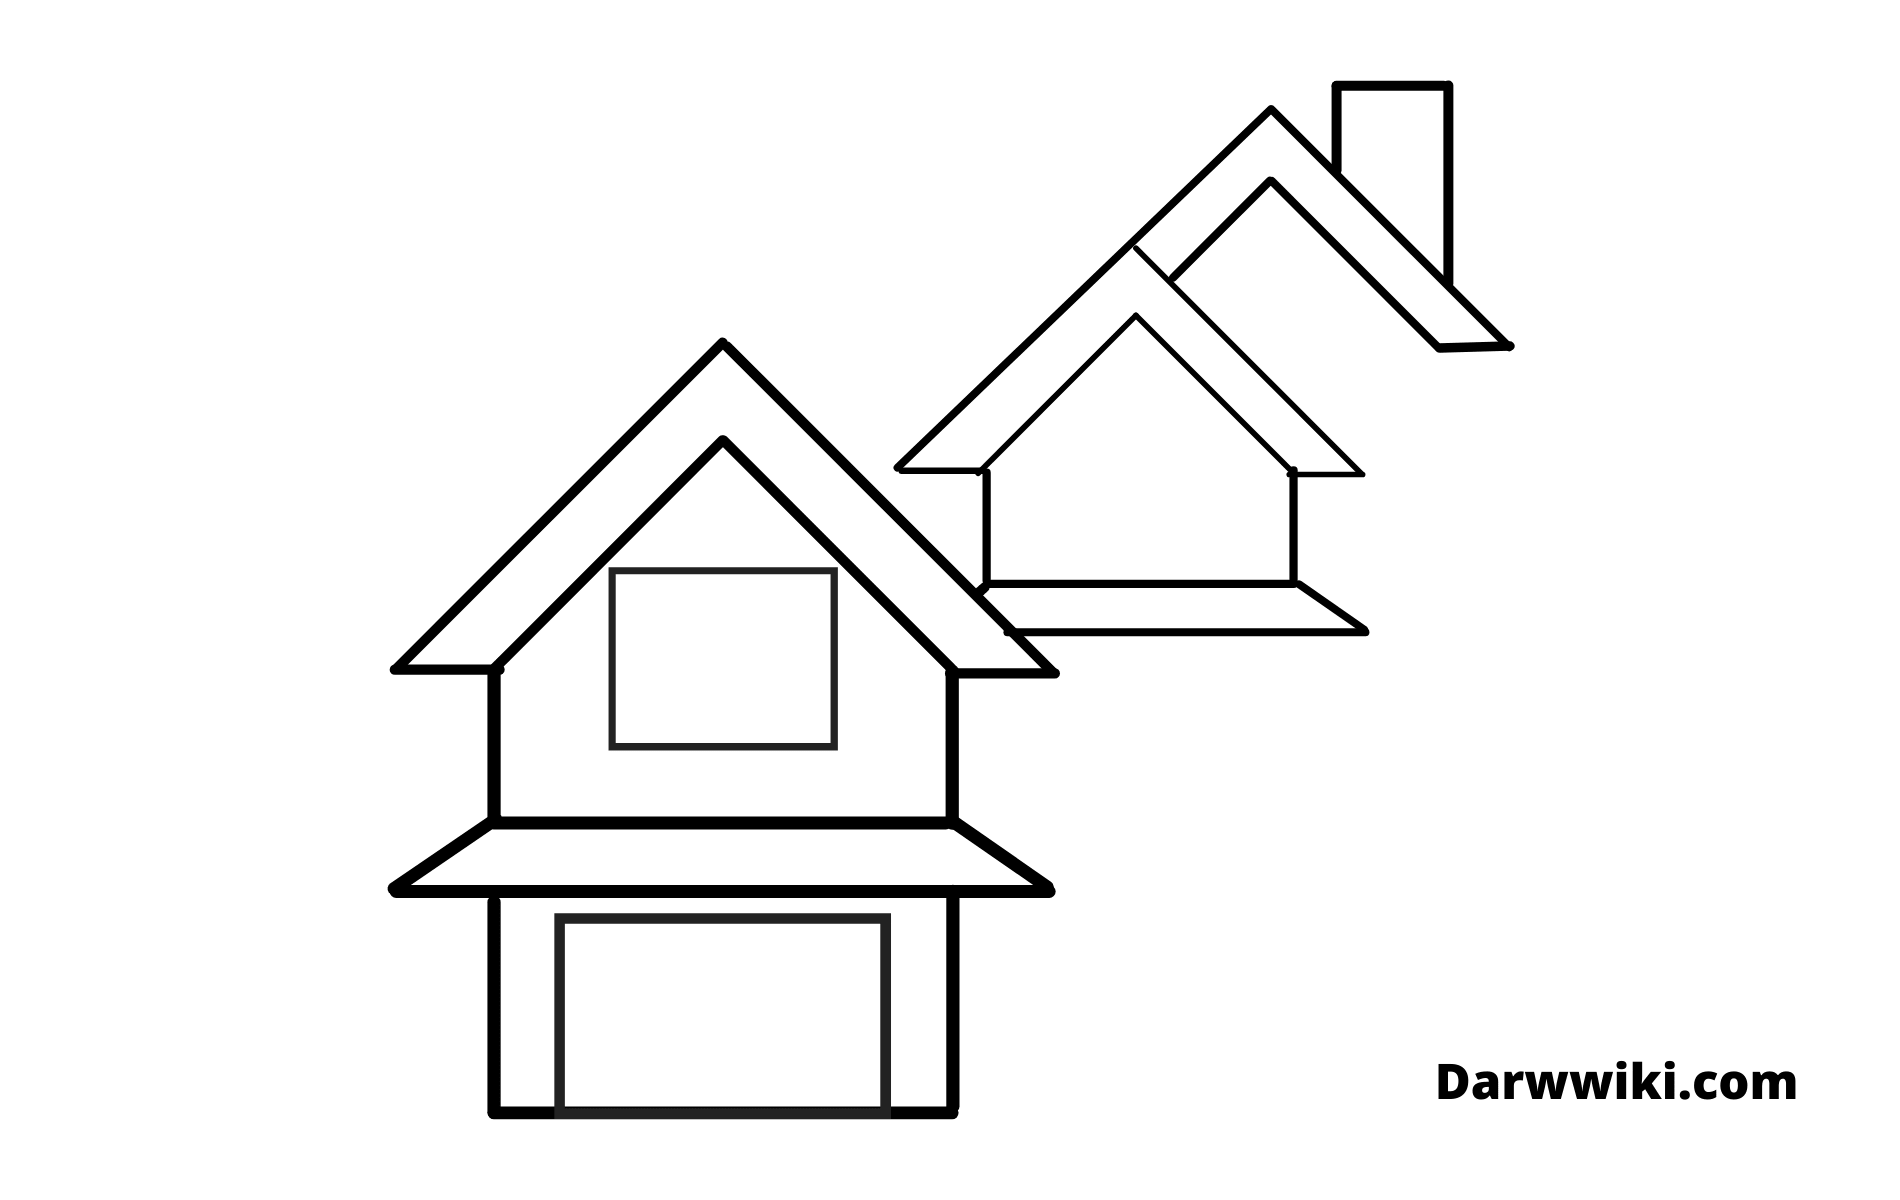 How to draw house Step 5 - Draw thirds Part of the House Roof